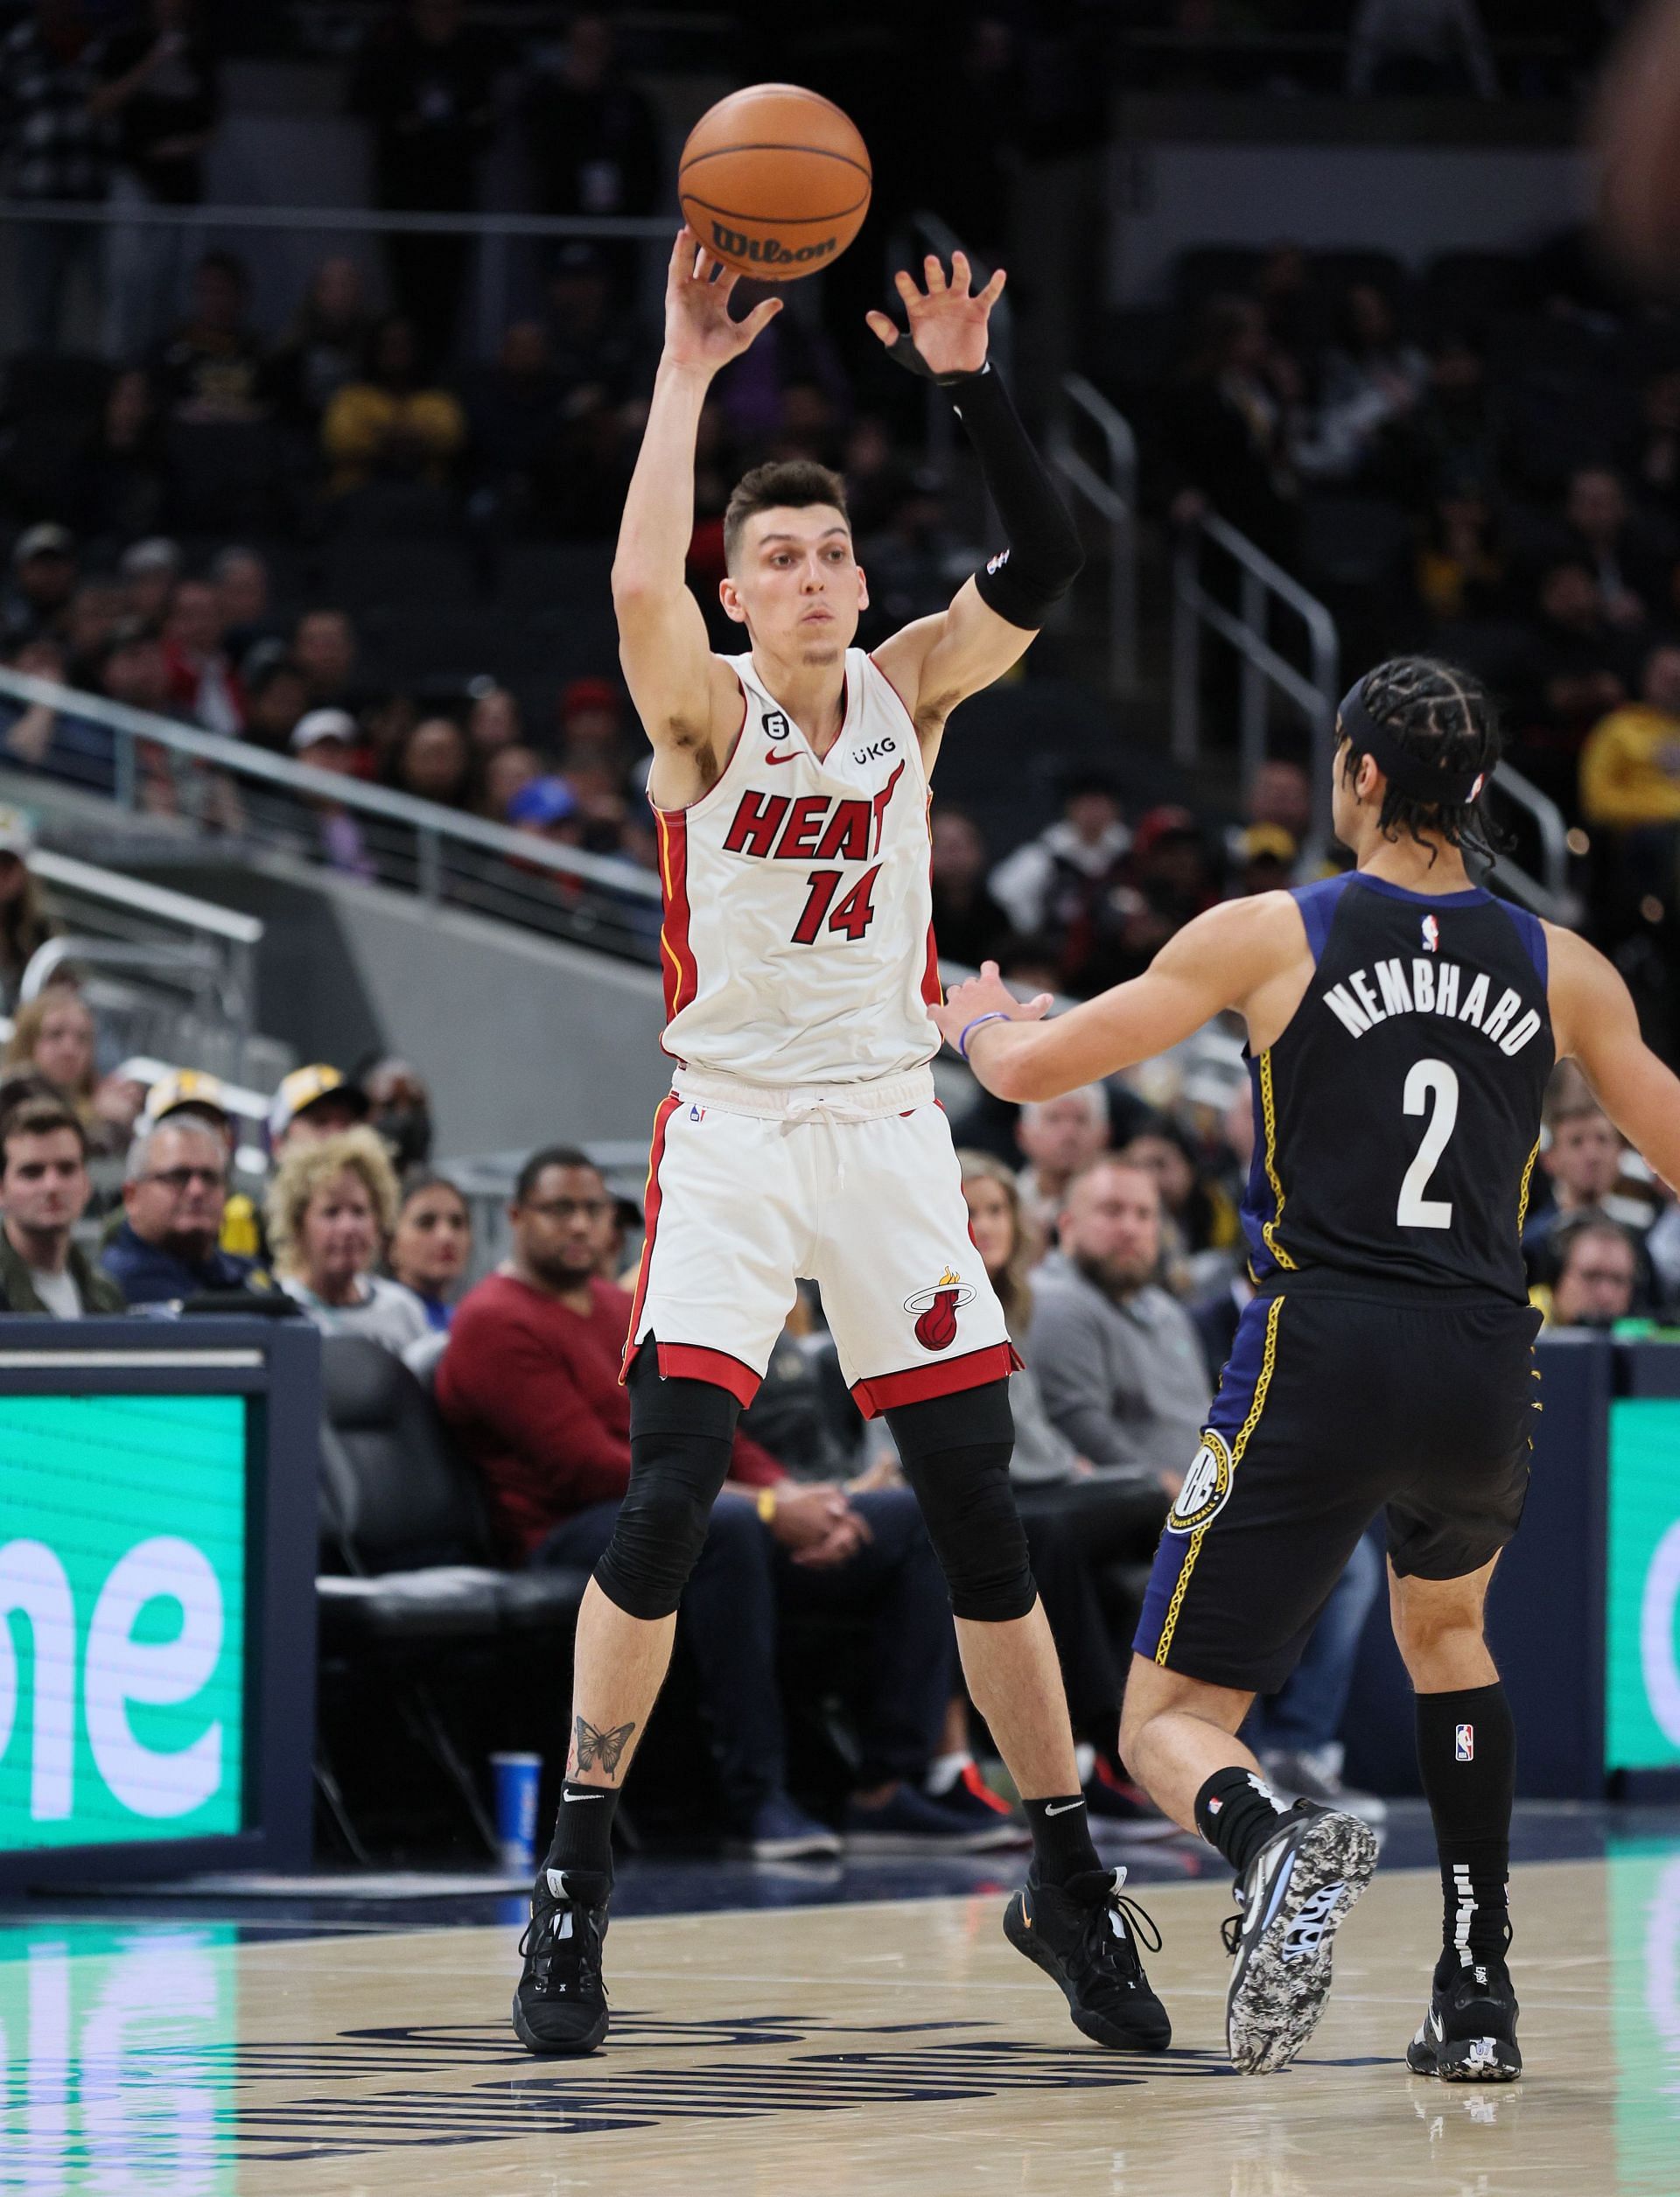 Miami Heat v Indiana Pacers